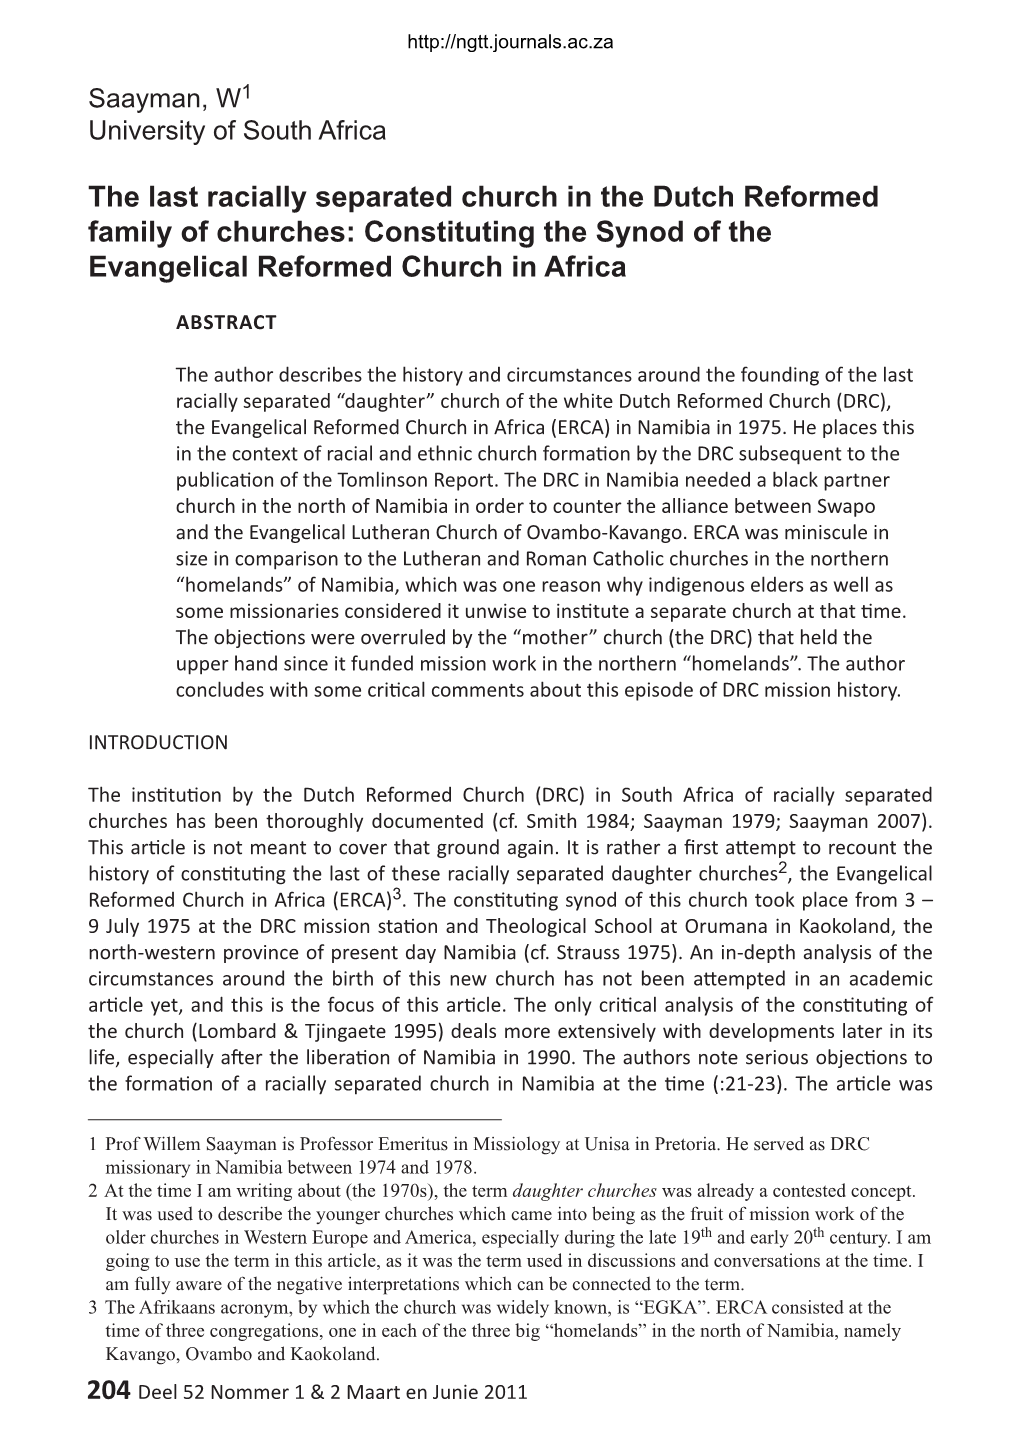 The Last Racially Separated Church in the Dutch Reformed Family of Churches: Constituting the Synod of the Evangelical Reformed Church in Africa